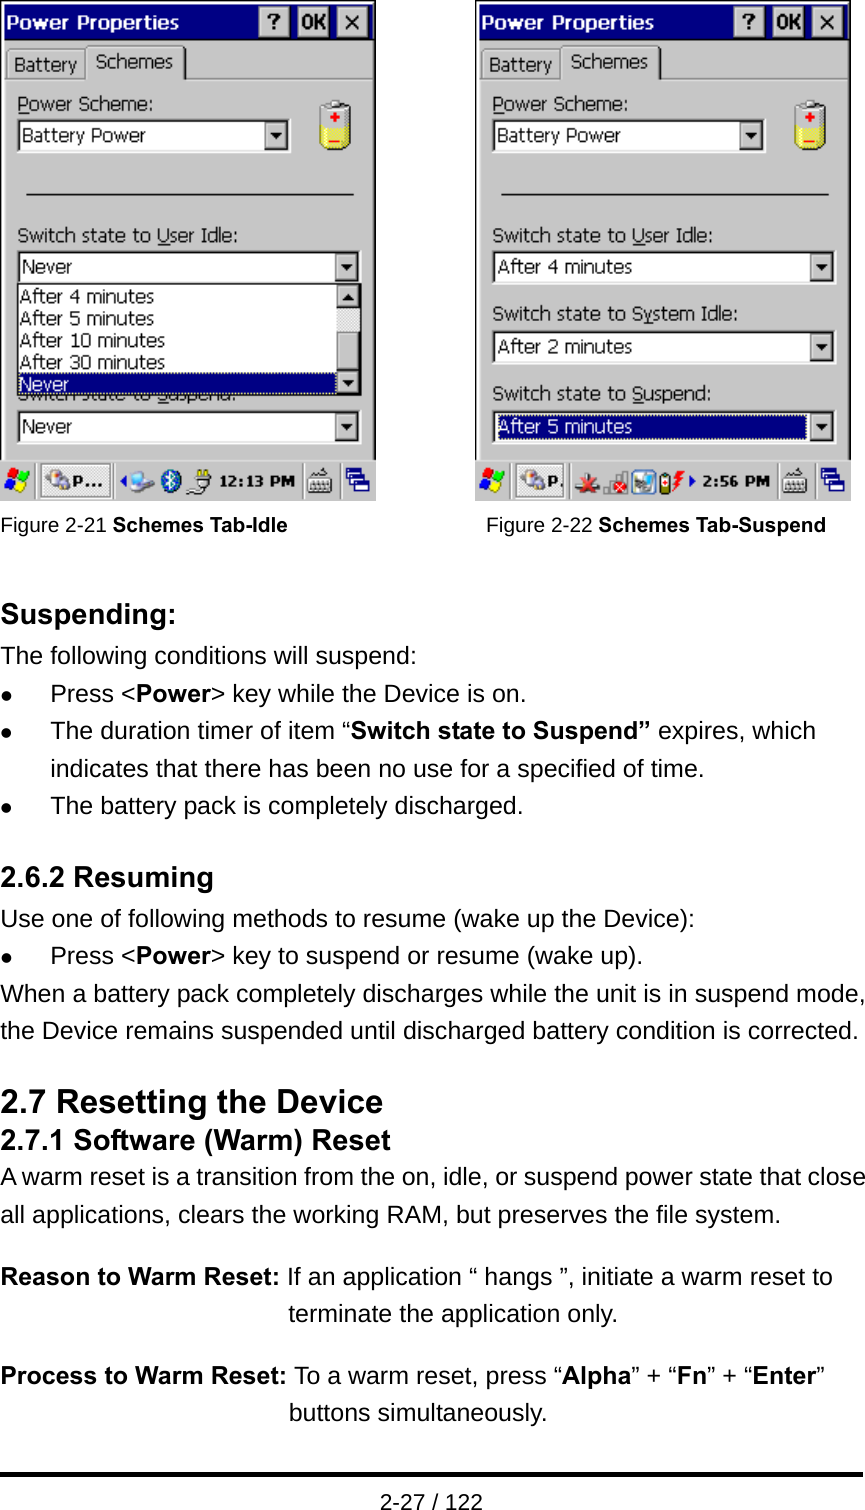  2-27 / 122           Figure 2-21 Schemes Tab-Idle                   Figure 2-22 Schemes Tab-Suspend   Suspending: The following conditions will suspend: z Press &lt;Power&gt; key while the Device is on. z The duration timer of item “Switch state to Suspend” expires, which indicates that there has been no use for a specified of time. z The battery pack is completely discharged.  2.6.2 Resuming Use one of following methods to resume (wake up the Device): z Press &lt;Power&gt; key to suspend or resume (wake up). When a battery pack completely discharges while the unit is in suspend mode, the Device remains suspended until discharged battery condition is corrected.  2.7 Resetting the Device 2.7.1 Software (Warm) Reset A warm reset is a transition from the on, idle, or suspend power state that close all applications, clears the working RAM, but preserves the file system.  Reason to Warm Reset: If an application “ hangs ”, initiate a warm reset to terminate the application only.  Process to Warm Reset: To a warm reset, press “Alpha” + “Fn” + “Enter” buttons simultaneously. 